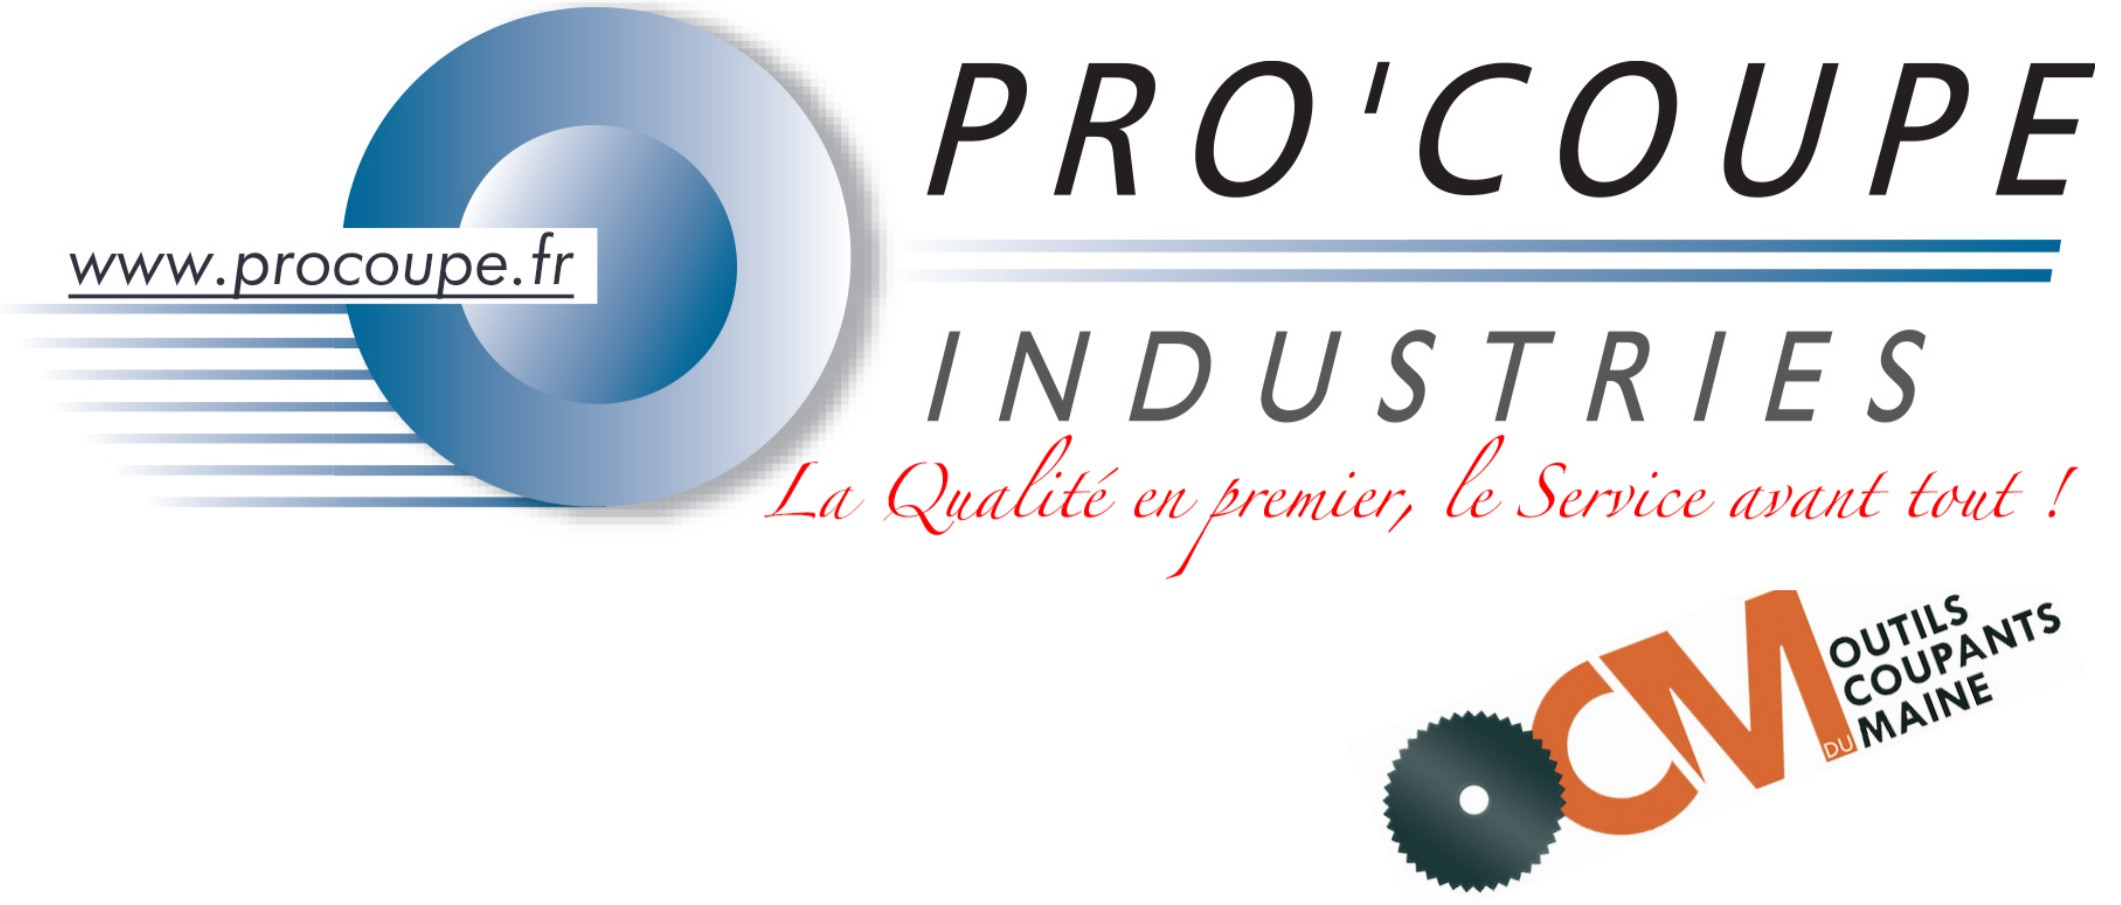 PRO'COUPE INDUSTRIES